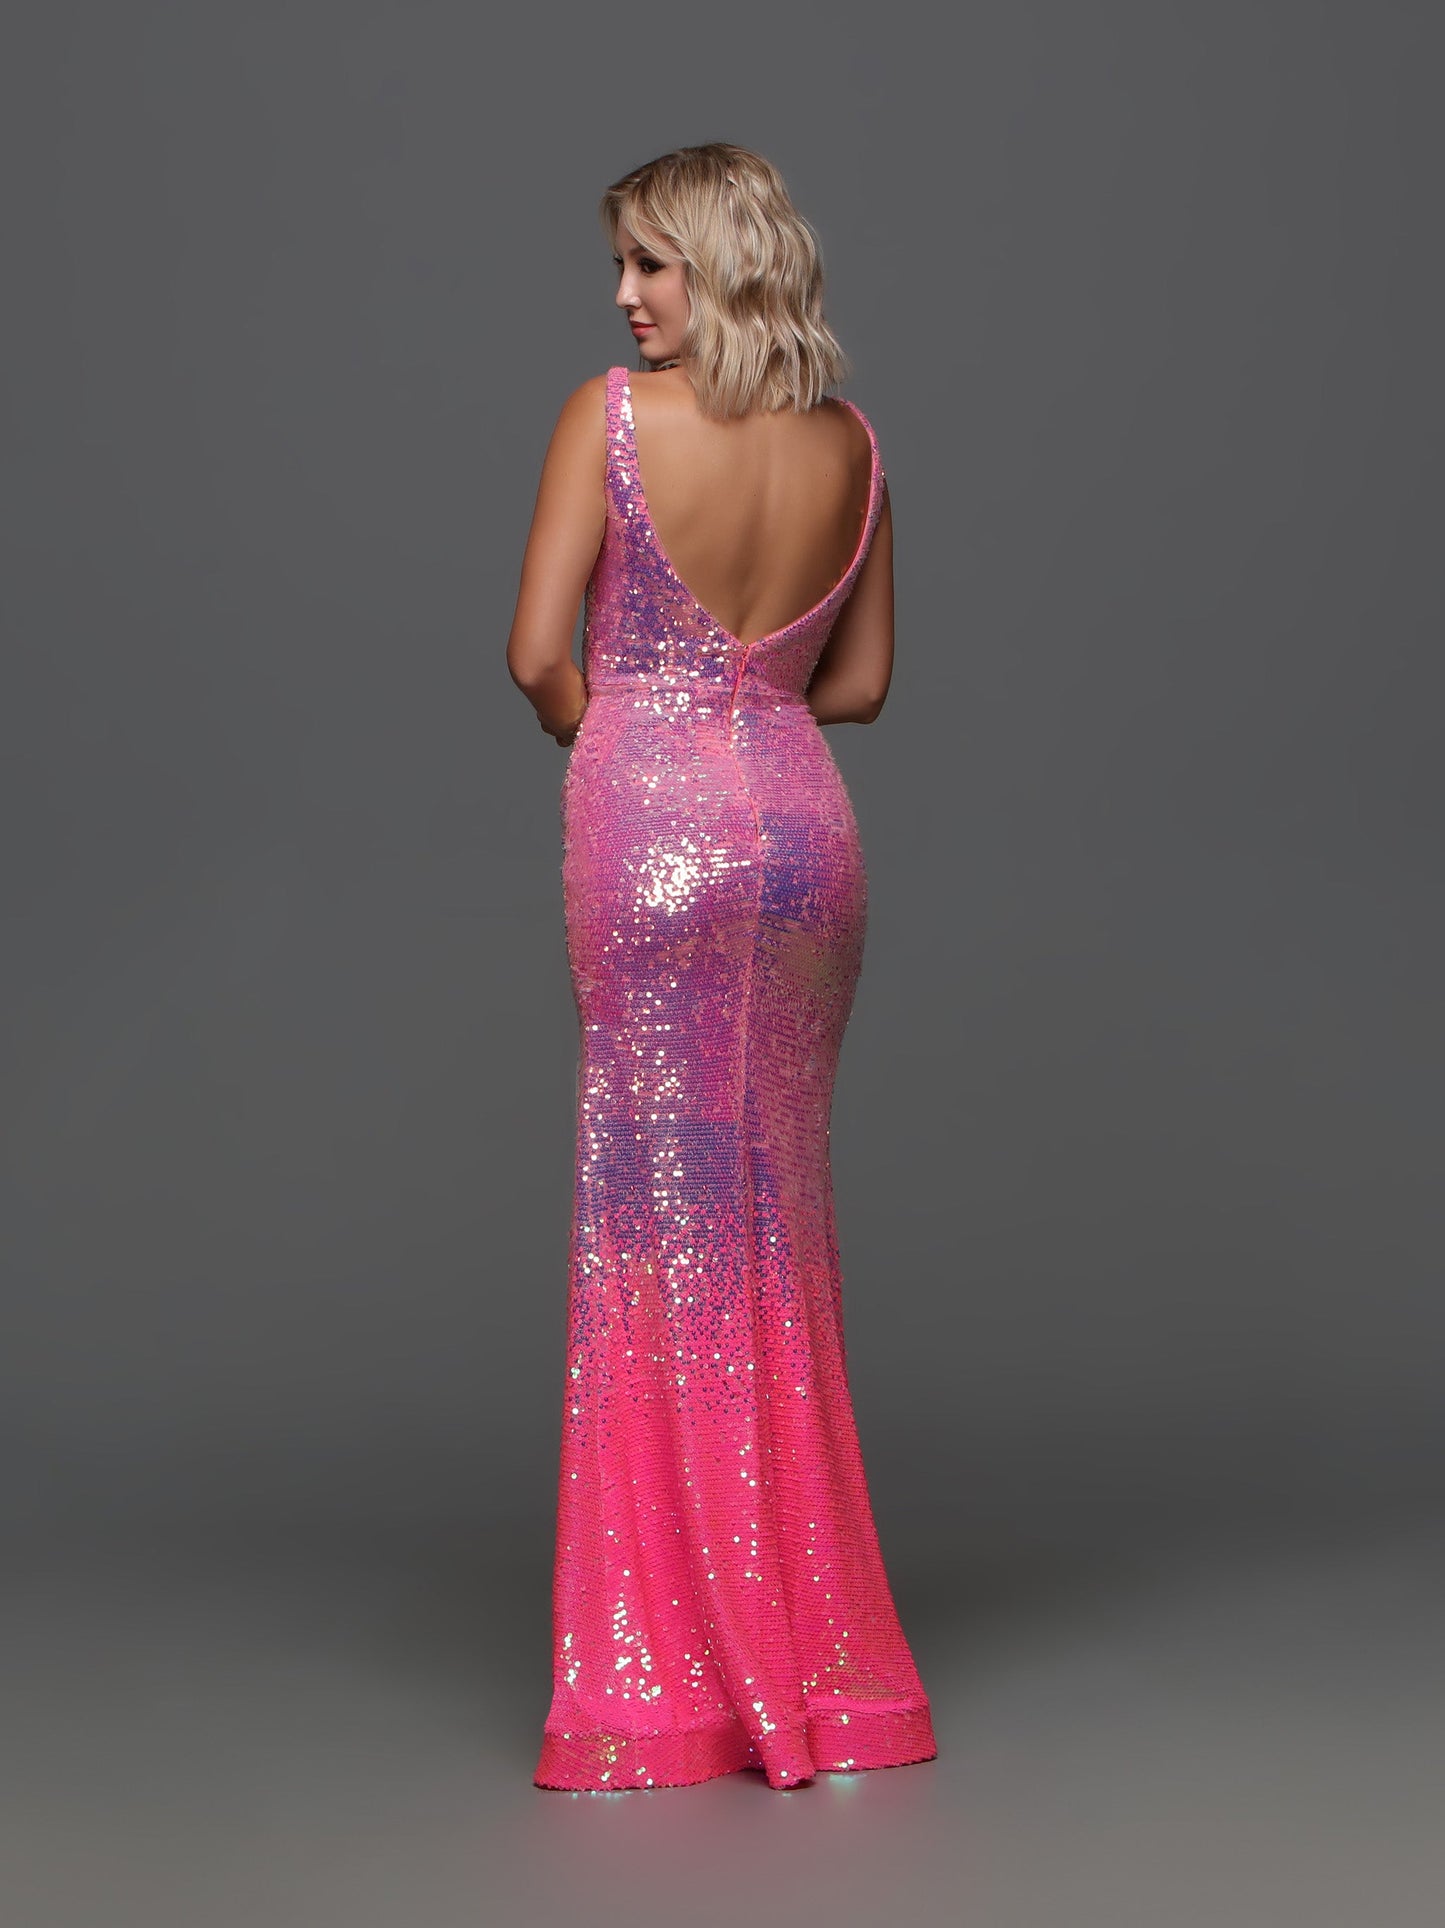 Introducing the Candice Wang 72301 Long Pink Sequin Ombre Prom Dress, the perfect combination of elegance and glamour. This stunning gown features a V-neckline and a subtle slit, making it a classic yet bold choice for any formal occasion. With its ombre sequin design, you'll shine and stand out from the crowd. Make a statement and feel confident in this eye-catching dress.  Sizes: 0-20  Colors: Bubblegum